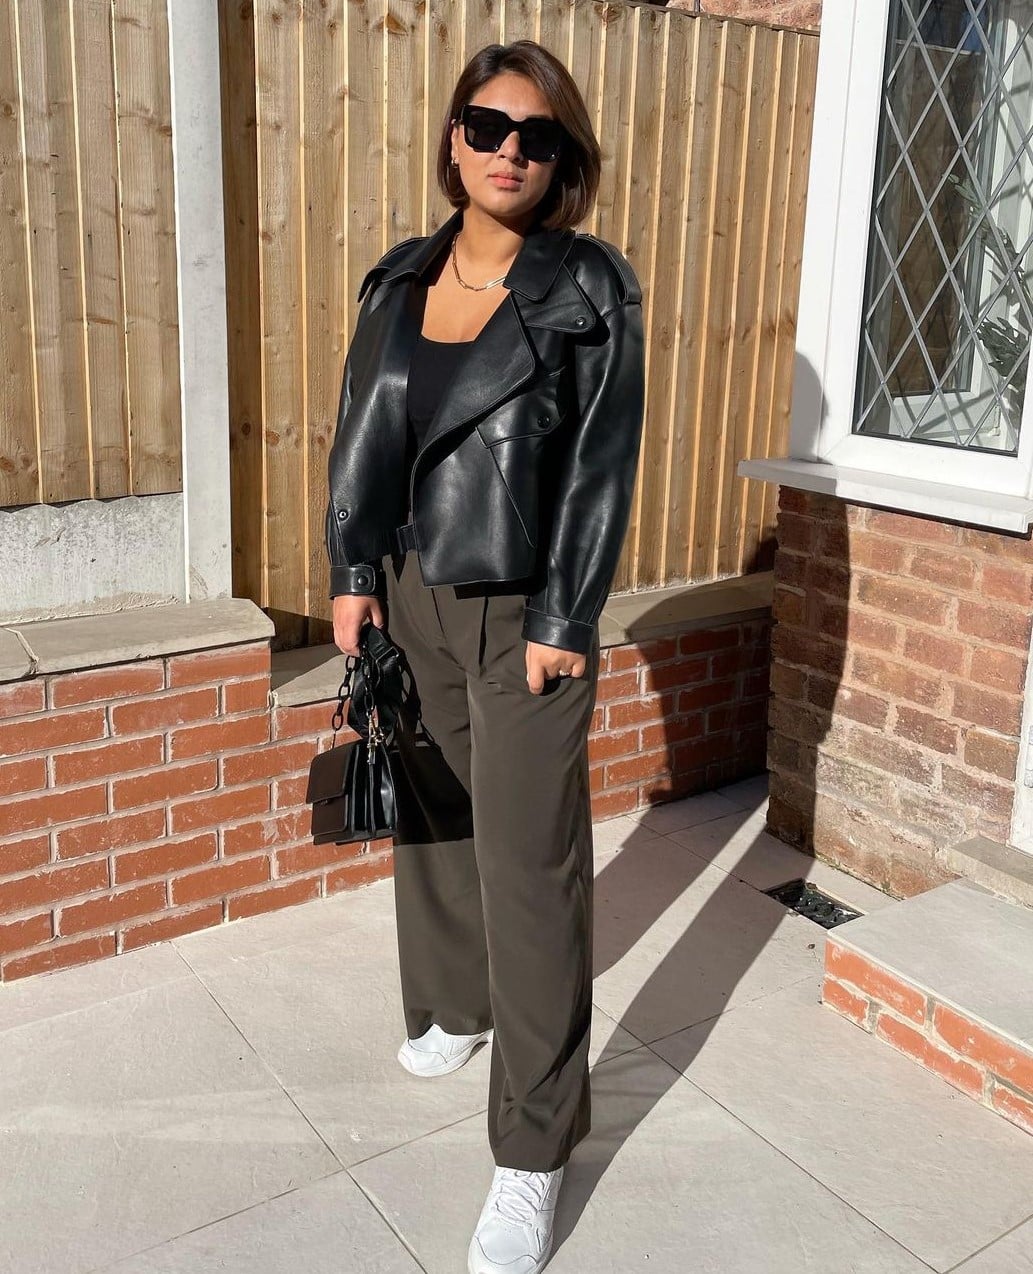 Black Leather Jacket Outfit with Trouser Pants